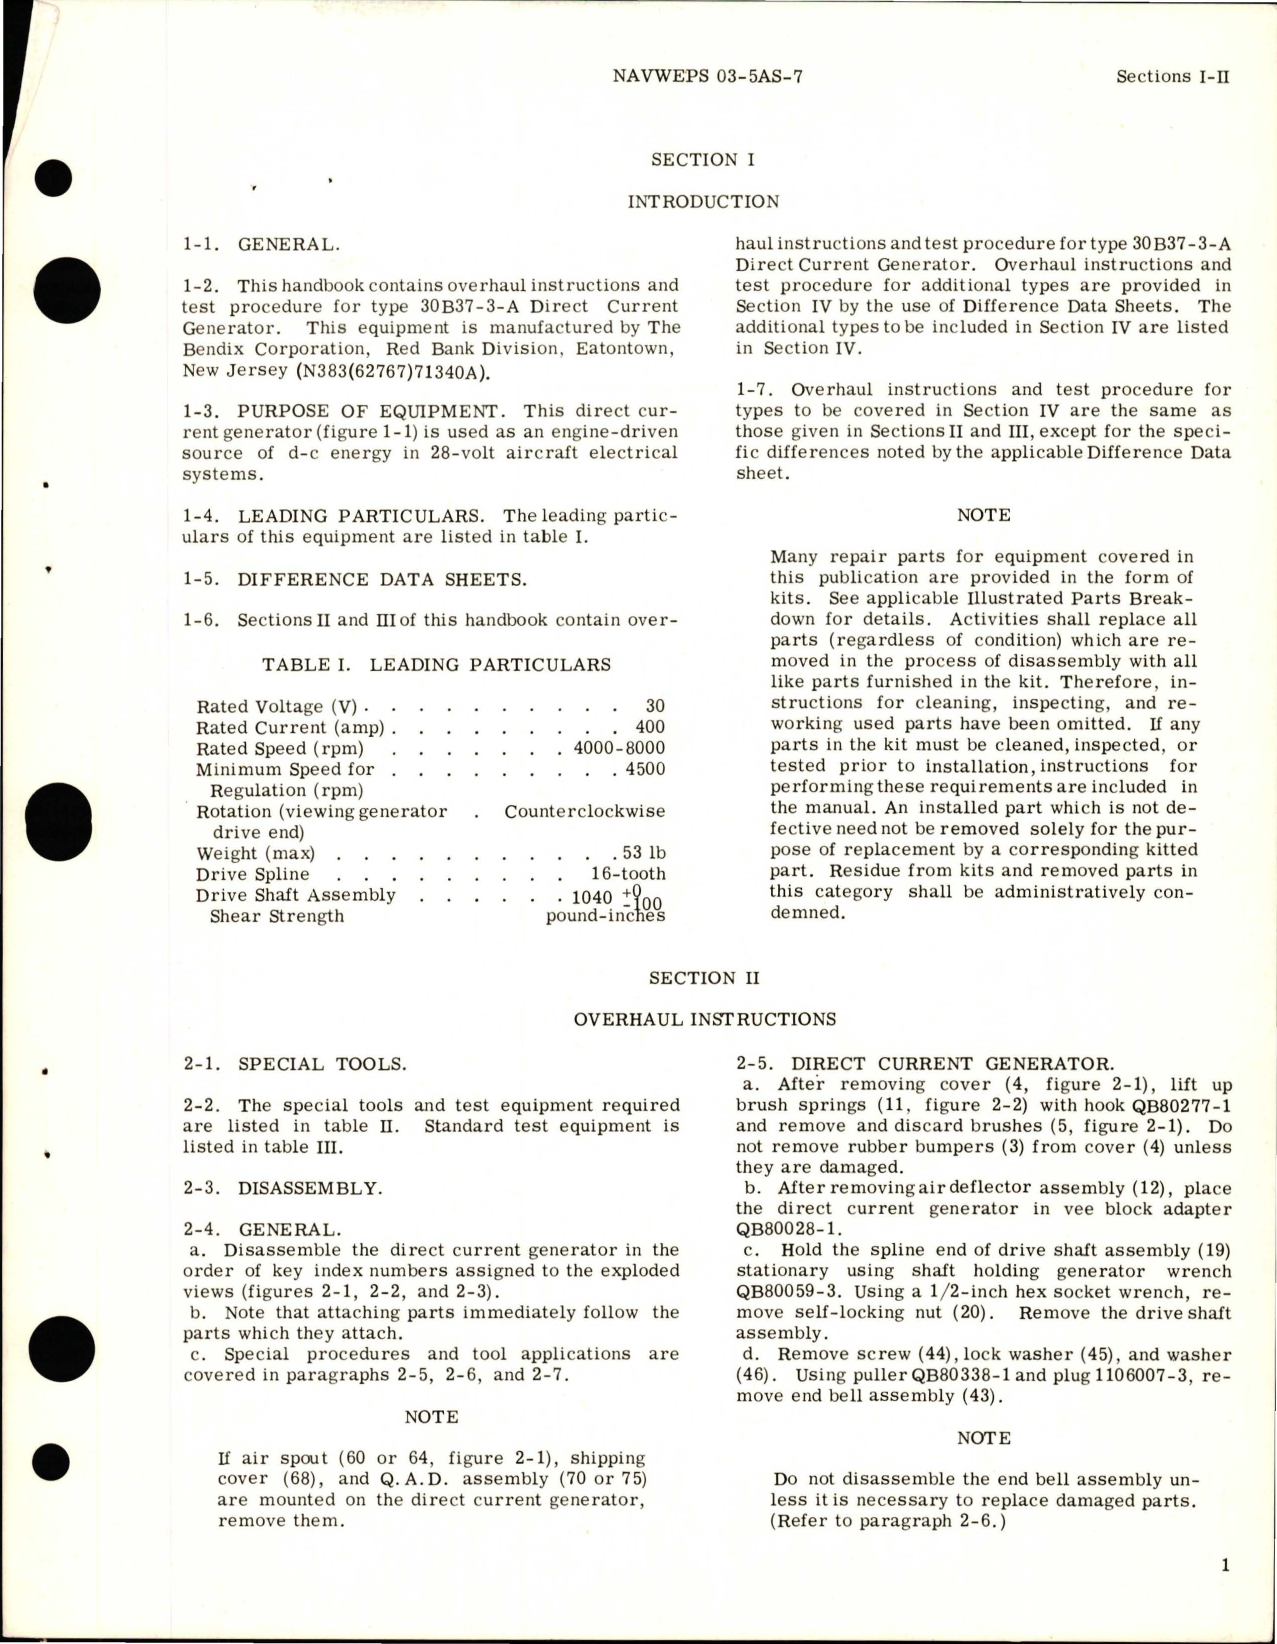 Sample page 5 from AirCorps Library document: Overhaul Instructions for Direct Current Generator (Starter Generator) Types 30B37-3-A, 30B37-15-A, 30B37-17-A